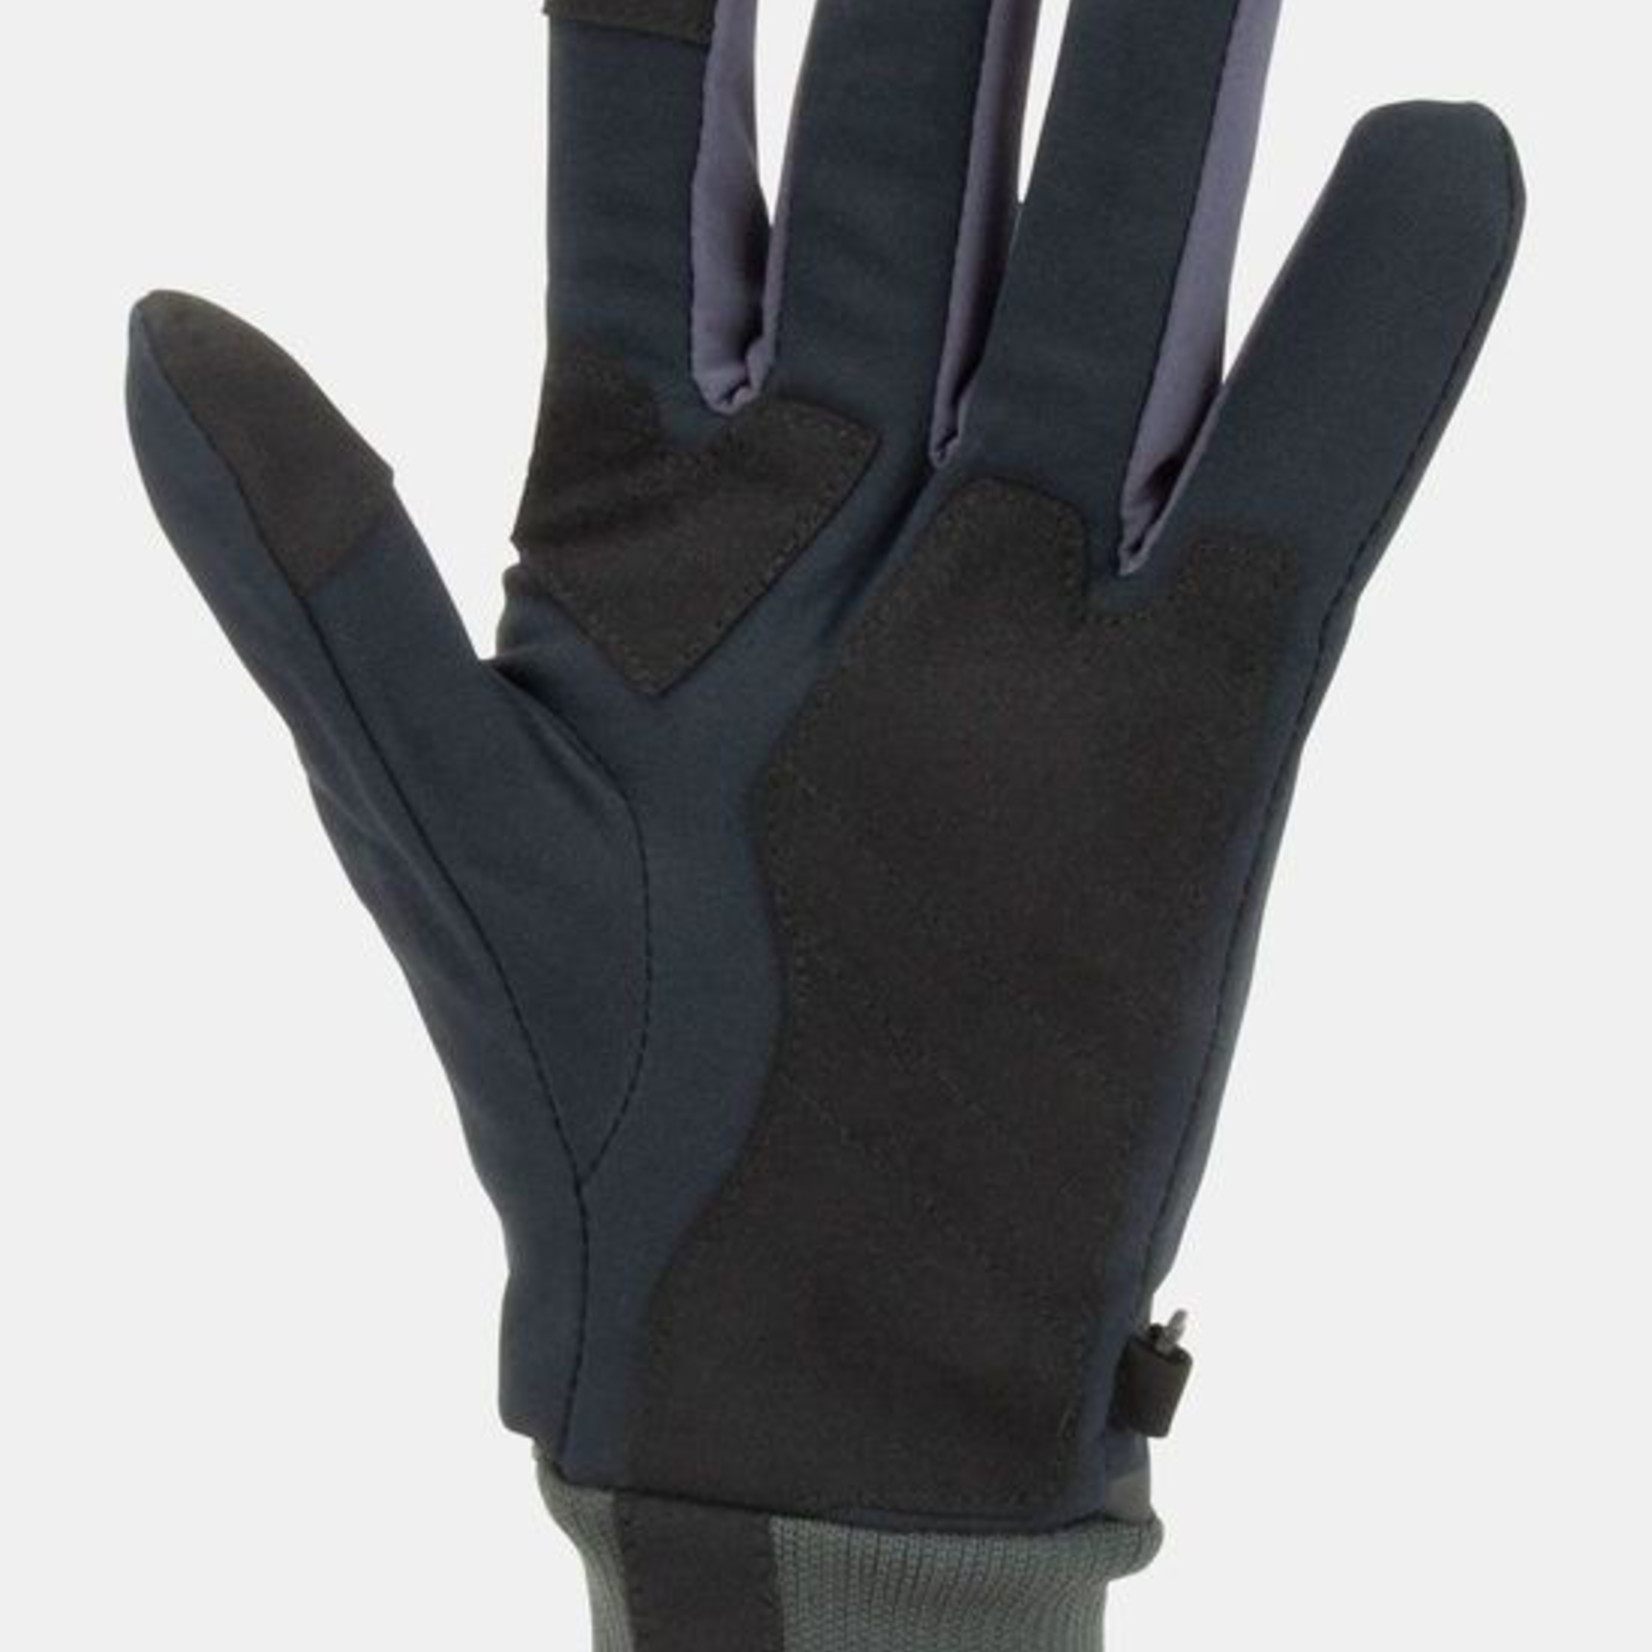 Sealskinz Waterproof All Weather Lightweight Glove With Fusion Control-Black/Grey